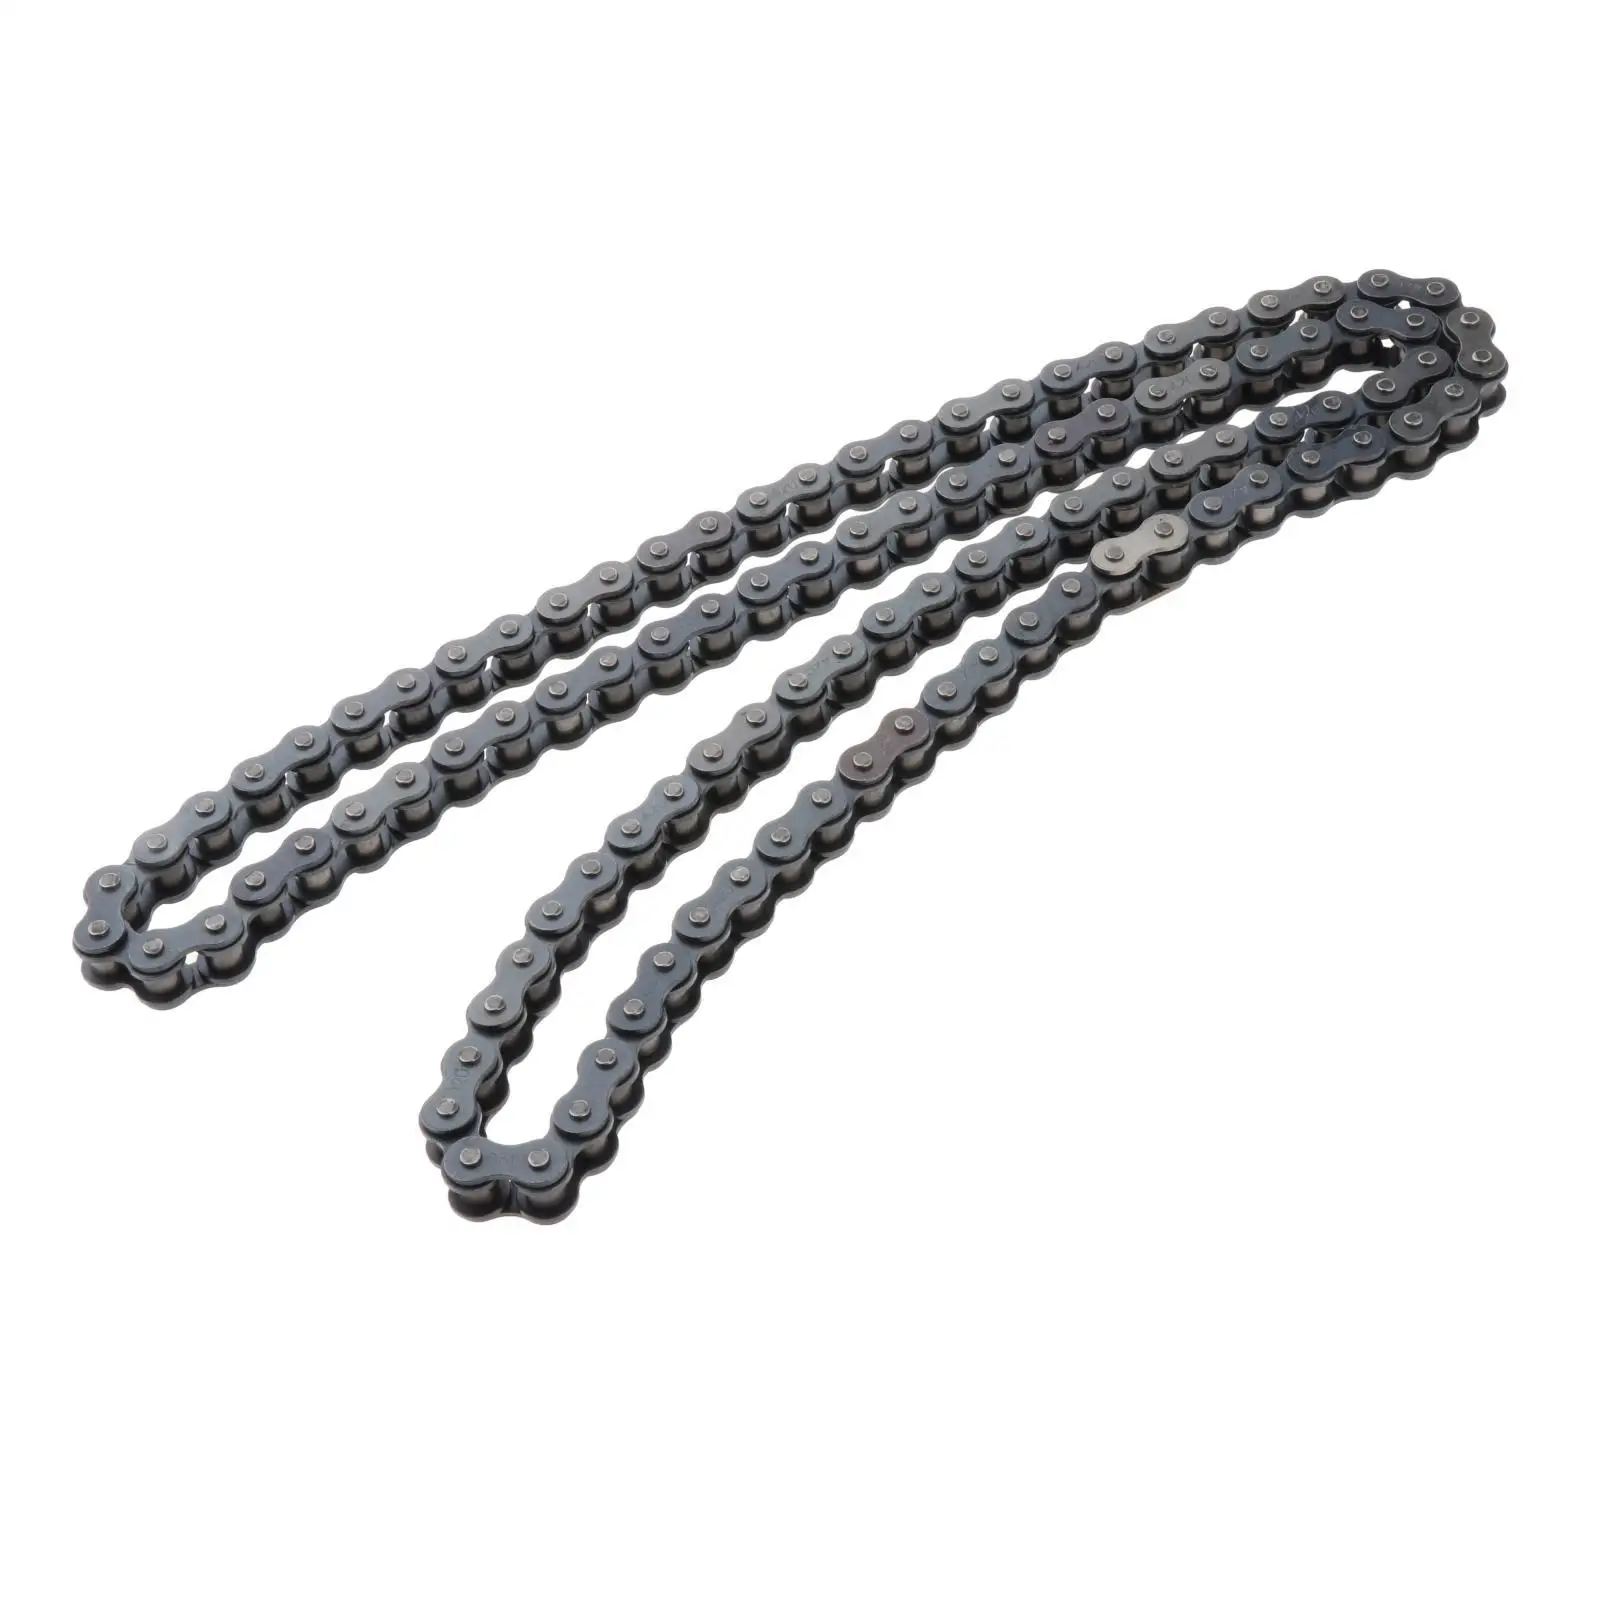 420 Motorcycle Chain 50-110Cc Spare Parts Accessories for Motorcycle